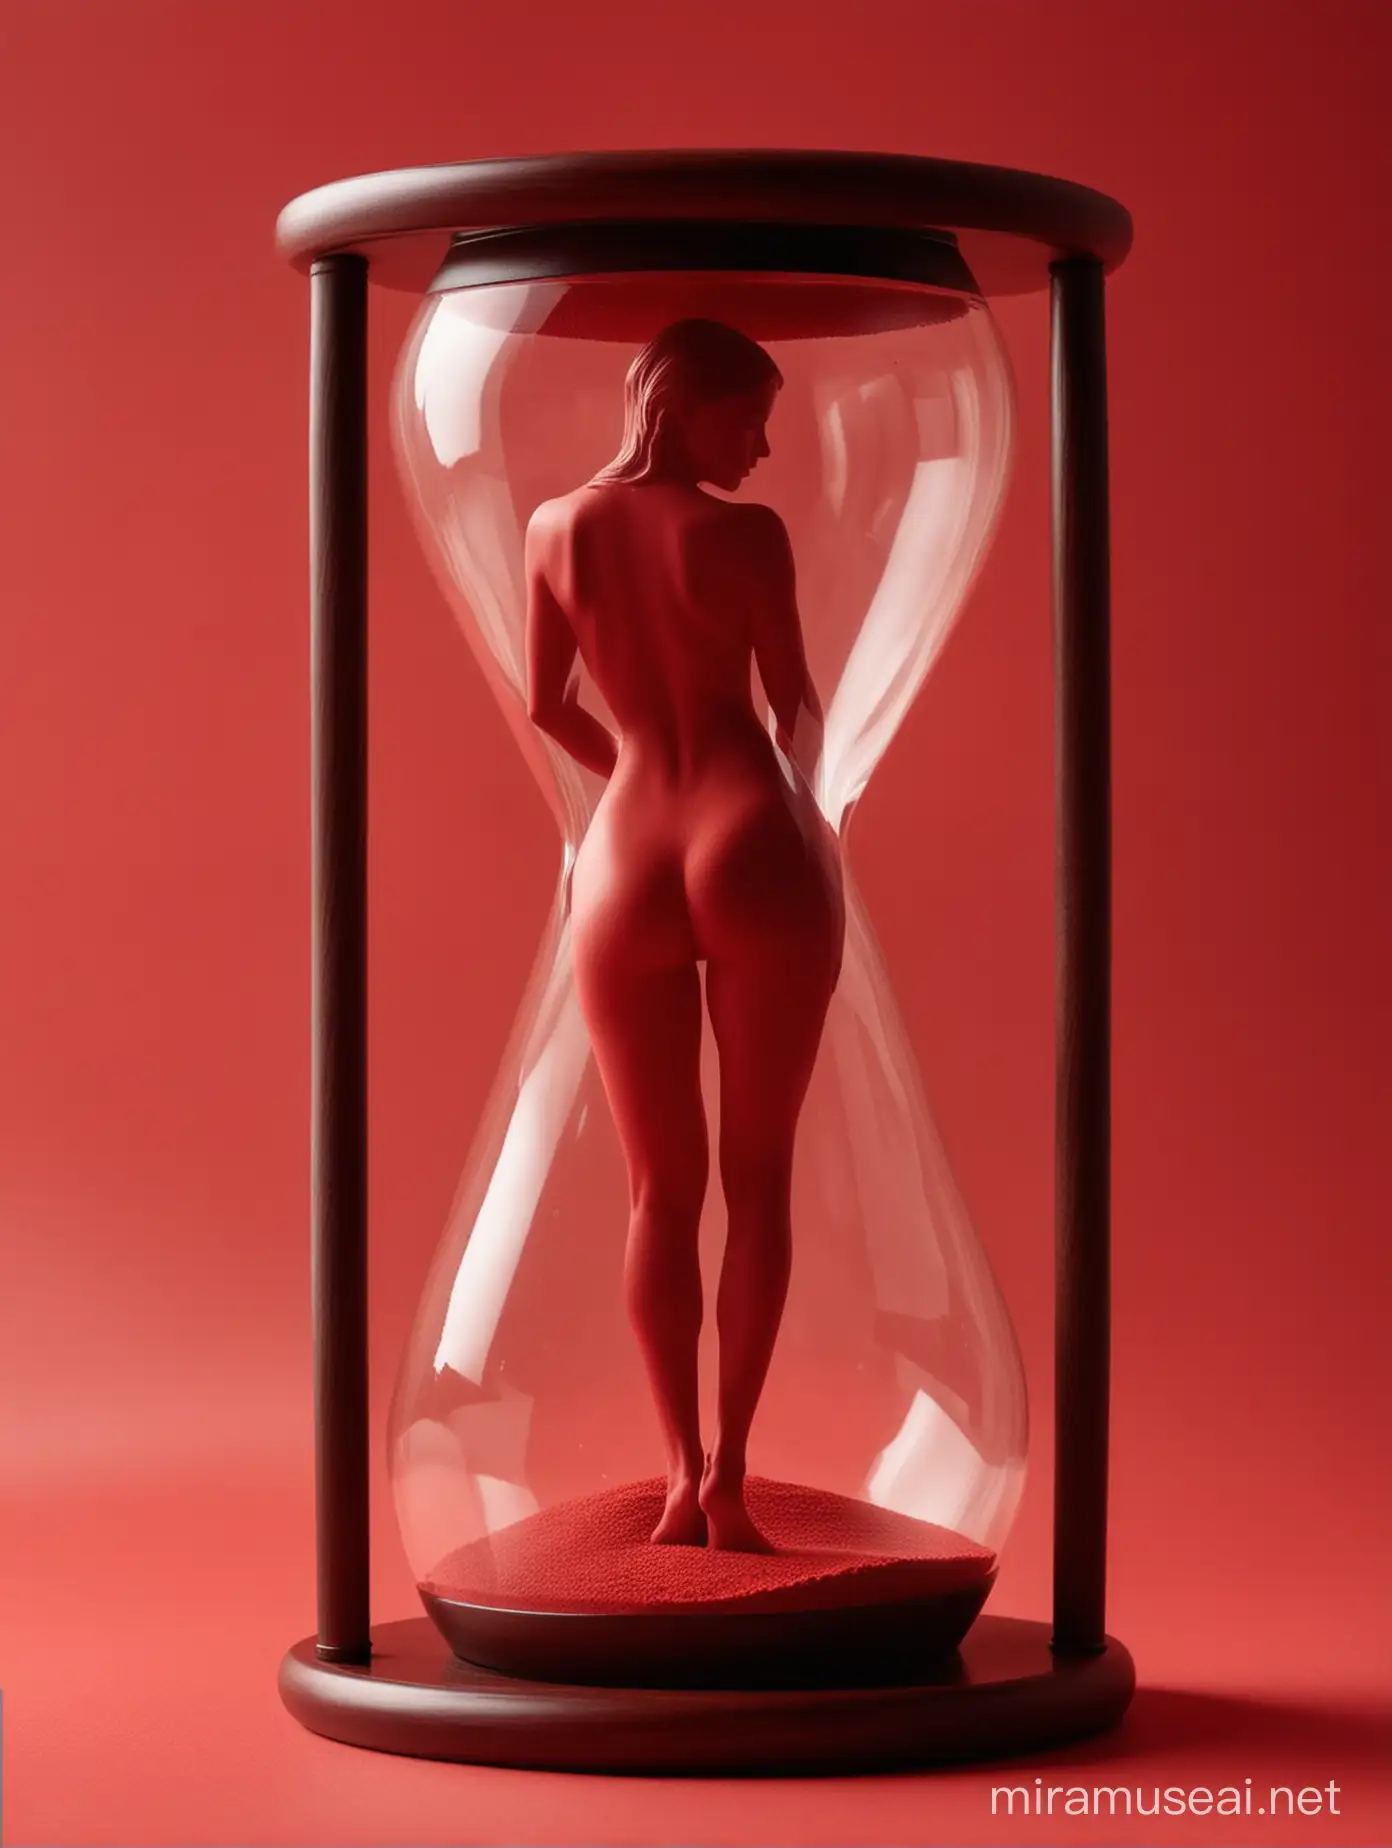 Hourglass Silhouette Feminine Contours on Vibrant Red Background